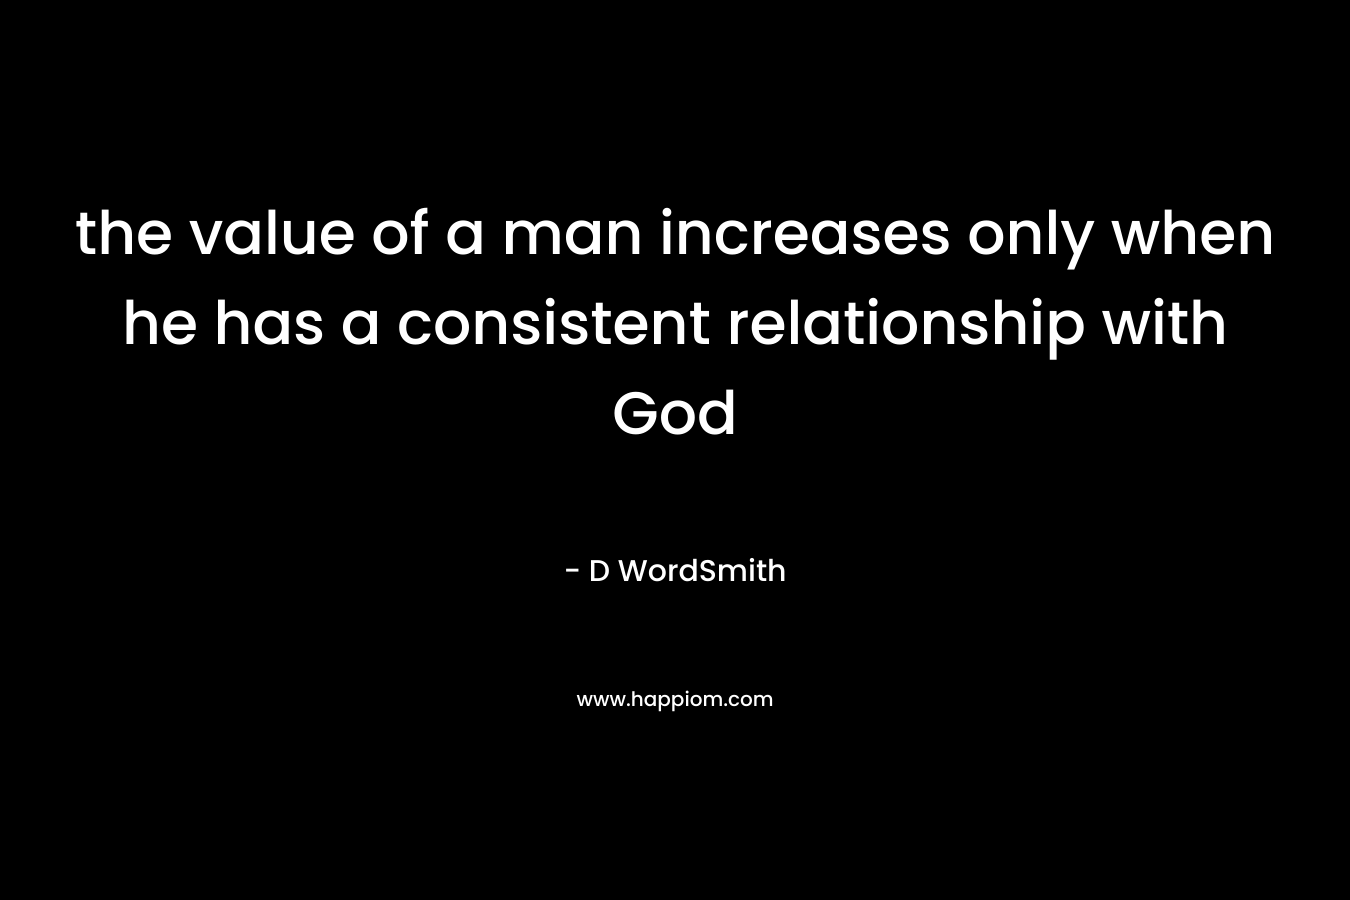 the value of a man increases only when he has a consistent relationship with God